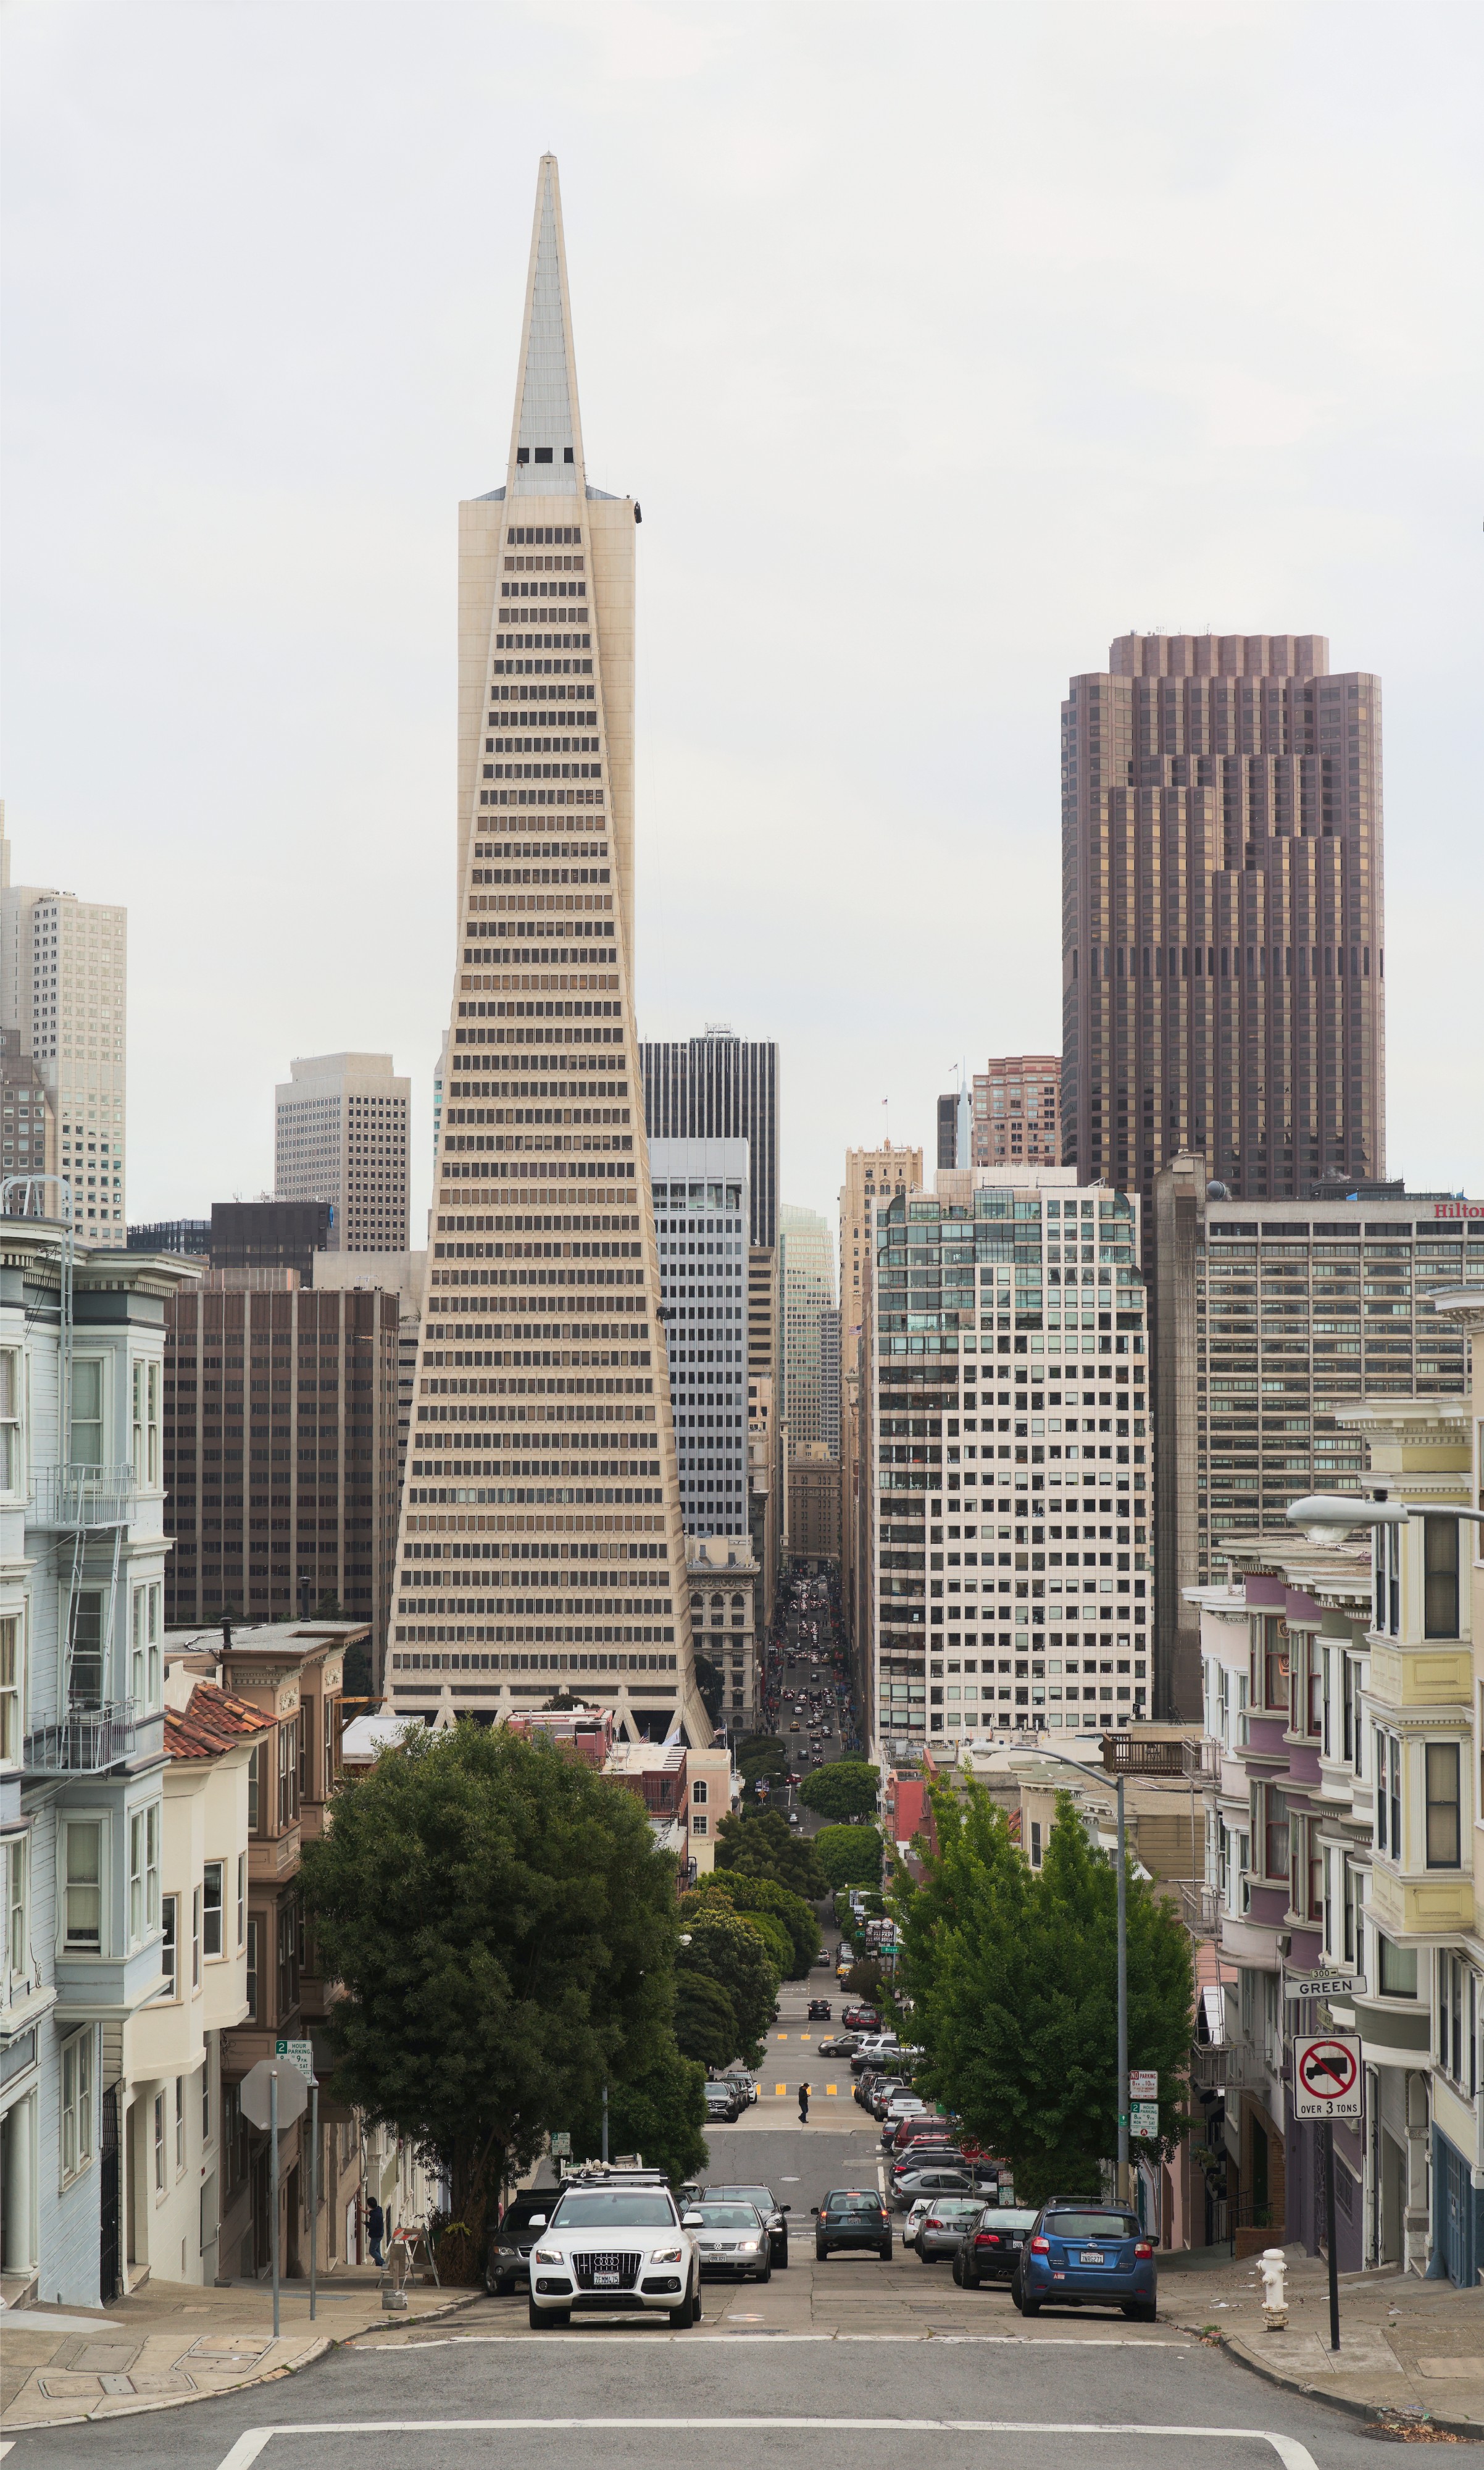 Transamerica Pyramid as seen from Telegraph Hill in 2016